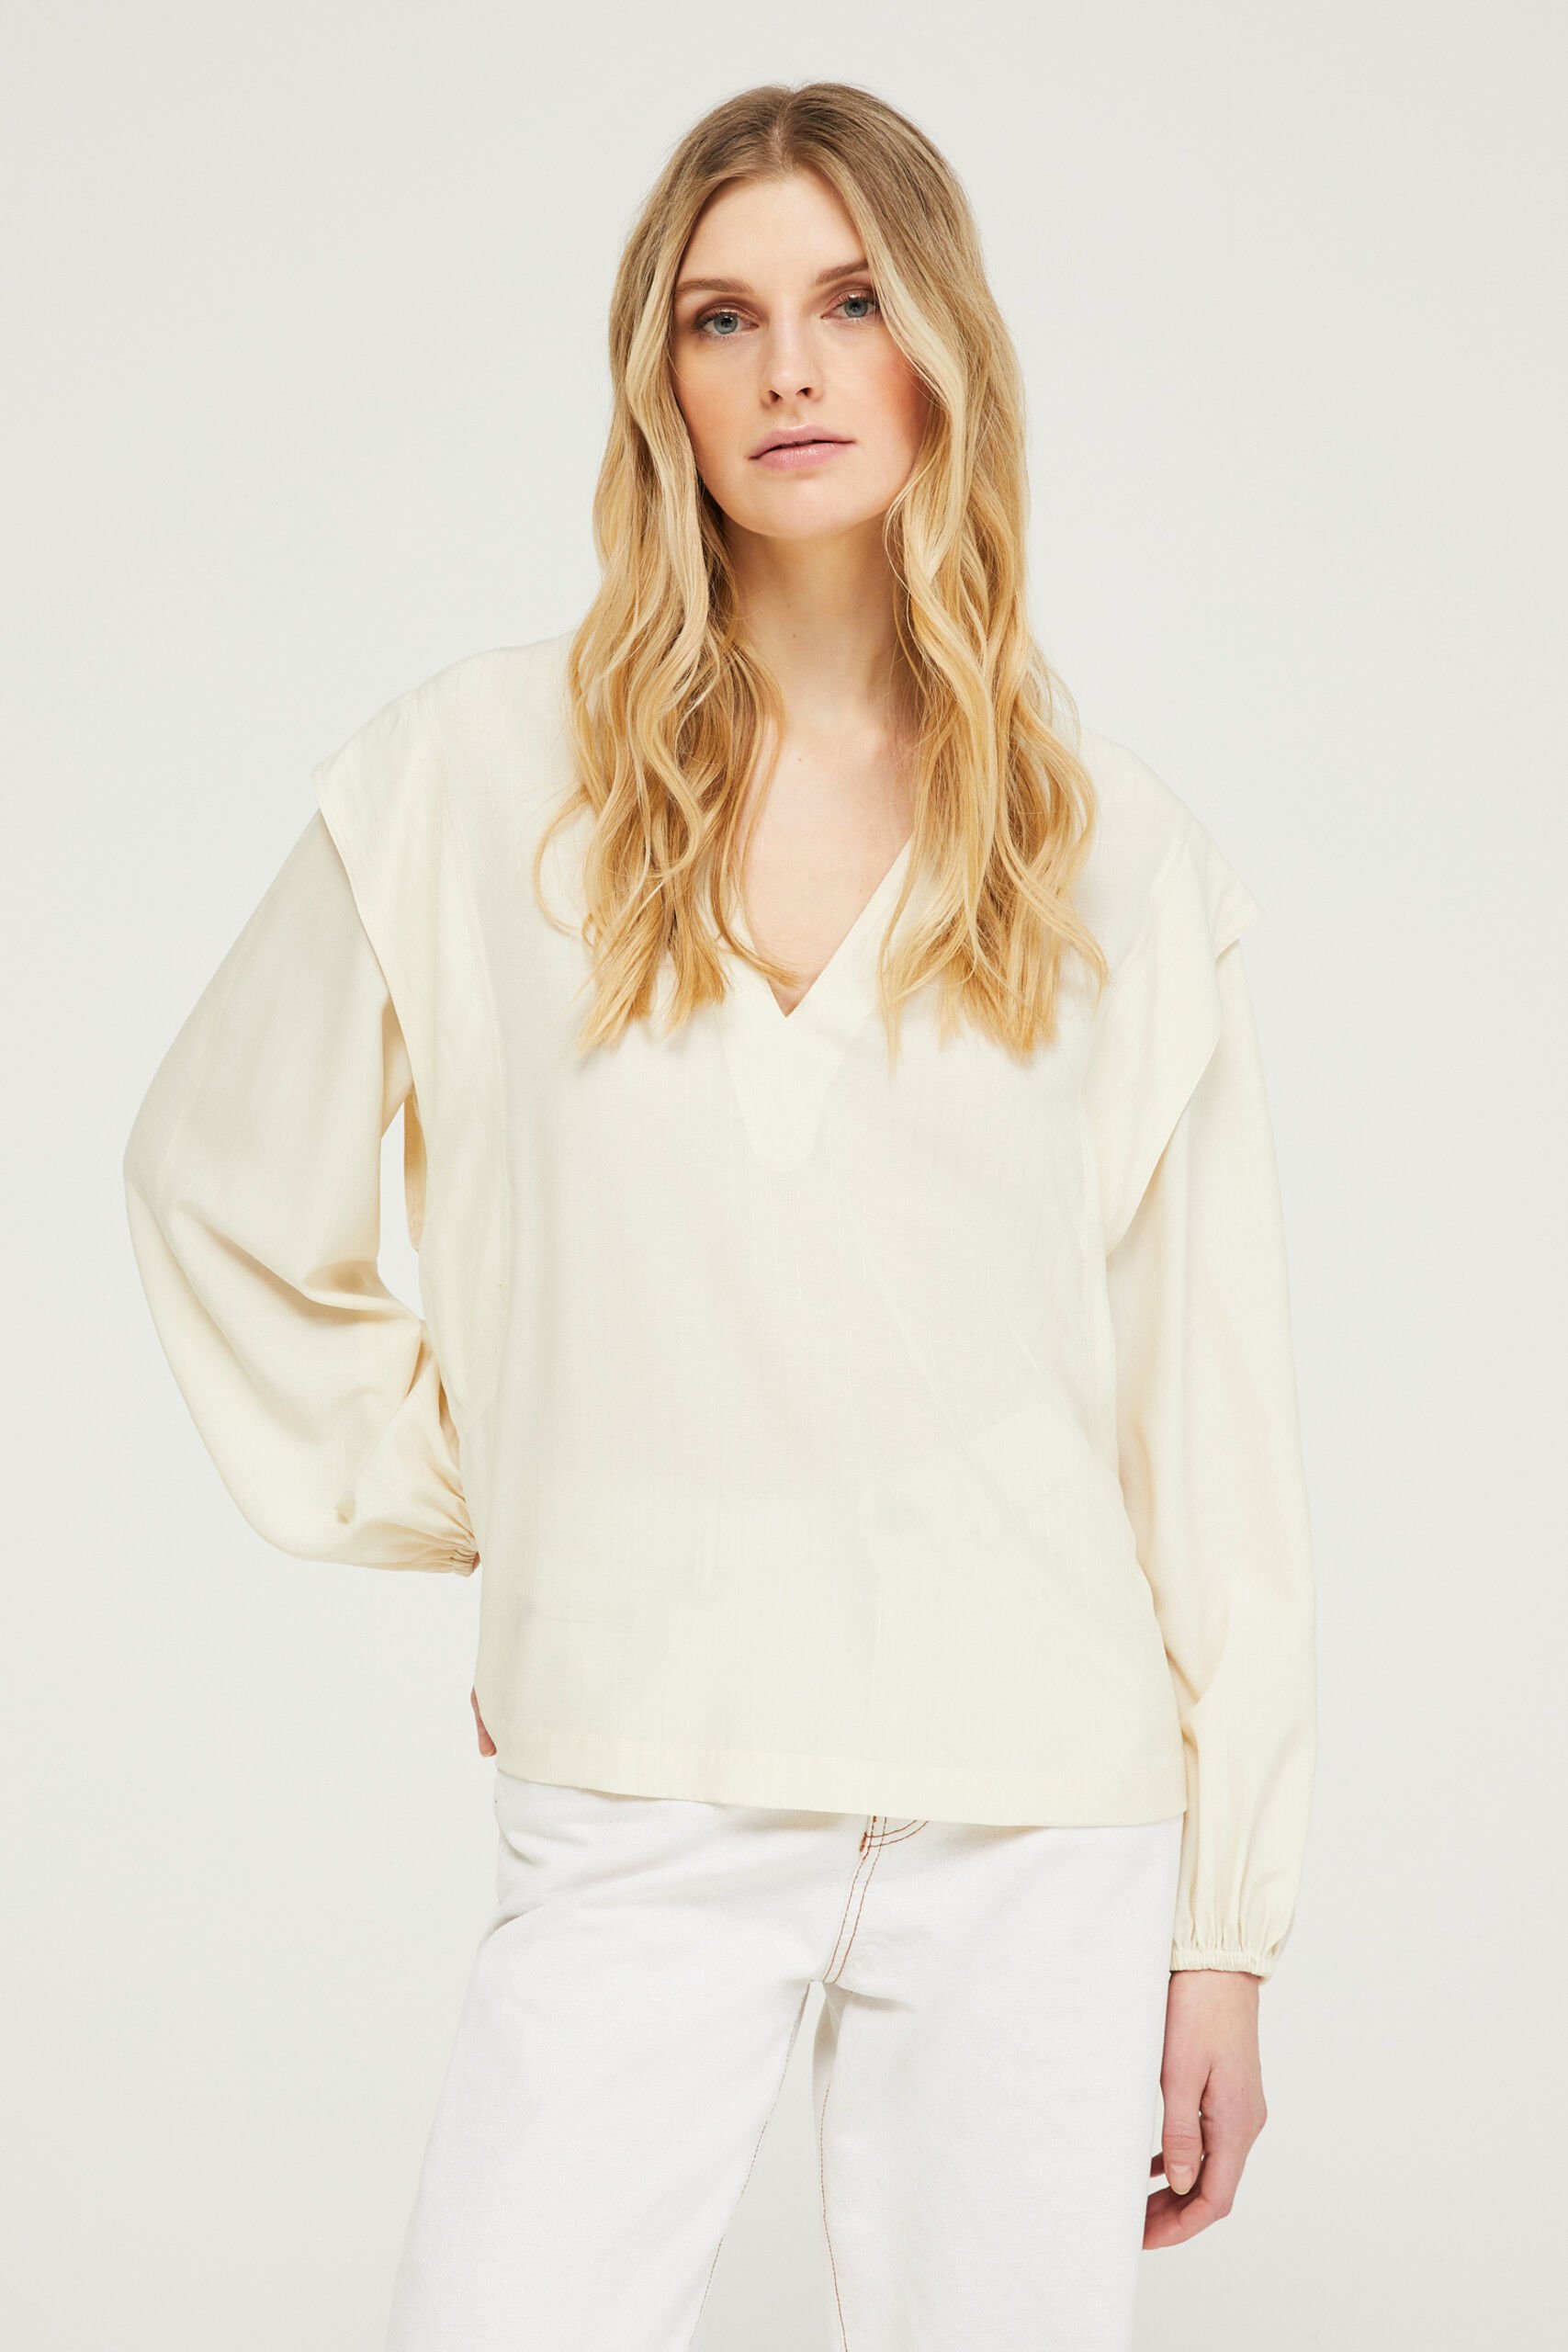 Women's Shirts and Blouses Collection 2021 | Sisley